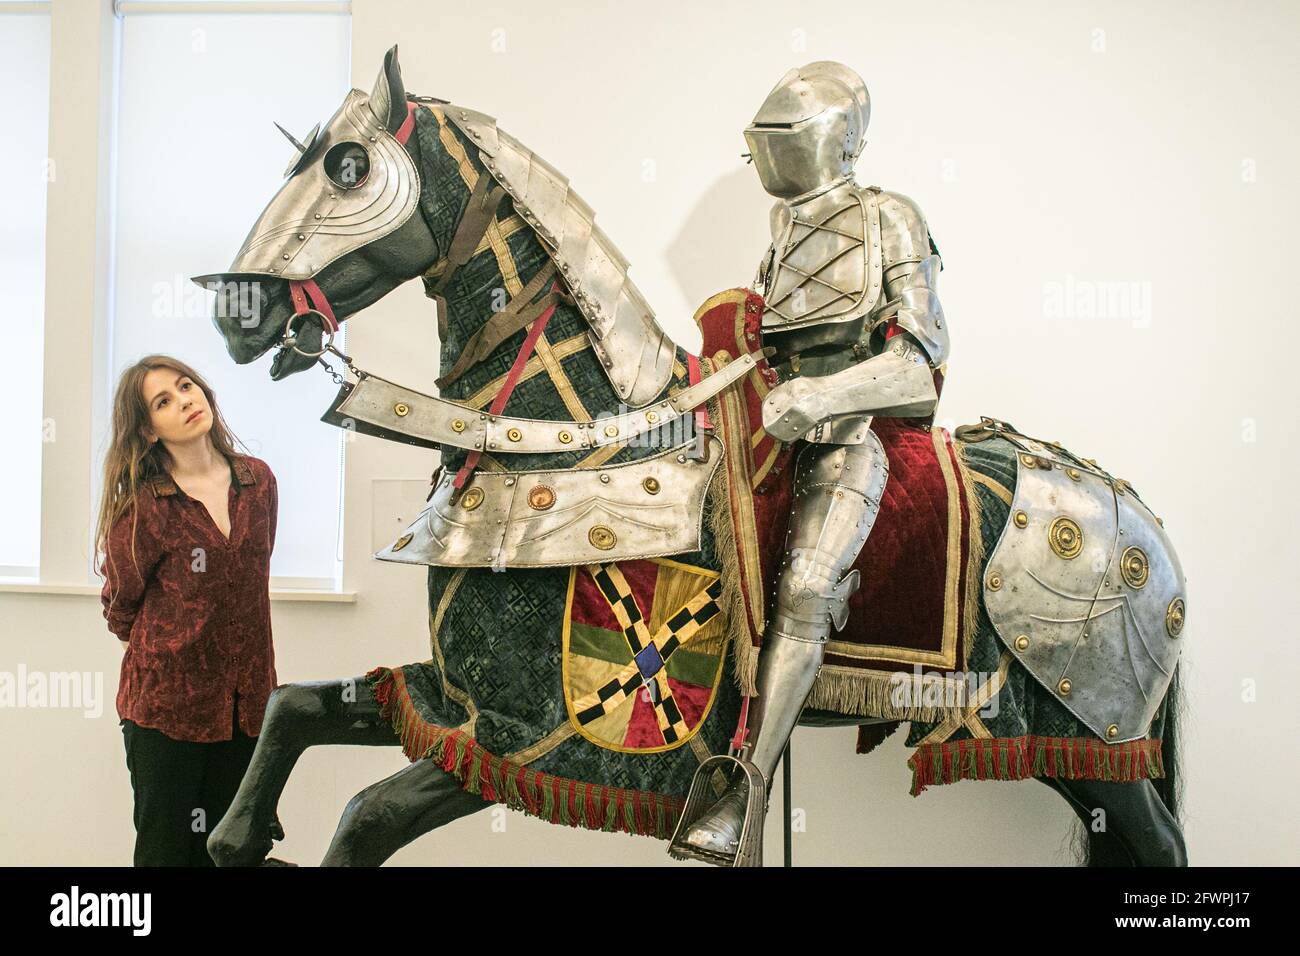 BONHAMS KNIGHTSBRIDGE LONDON 24 May 2021. An equestrian full armour for man and horse in German late 16th century style during a preview of Bonhams Antique Arms and Armour Sale. Built as an accurate reproduction inspired by two sets of armours on display in the world-famous Wallace Collection in London, this armour is an impressive, decorative example of a type that has not come onto the market since the 19th century. Estimate: £15,000 – 20,000. The sale will take place on 26 May at Bonhams Knightsbridge. Credit amer ghazzal/Alamy Live News Stock Photo